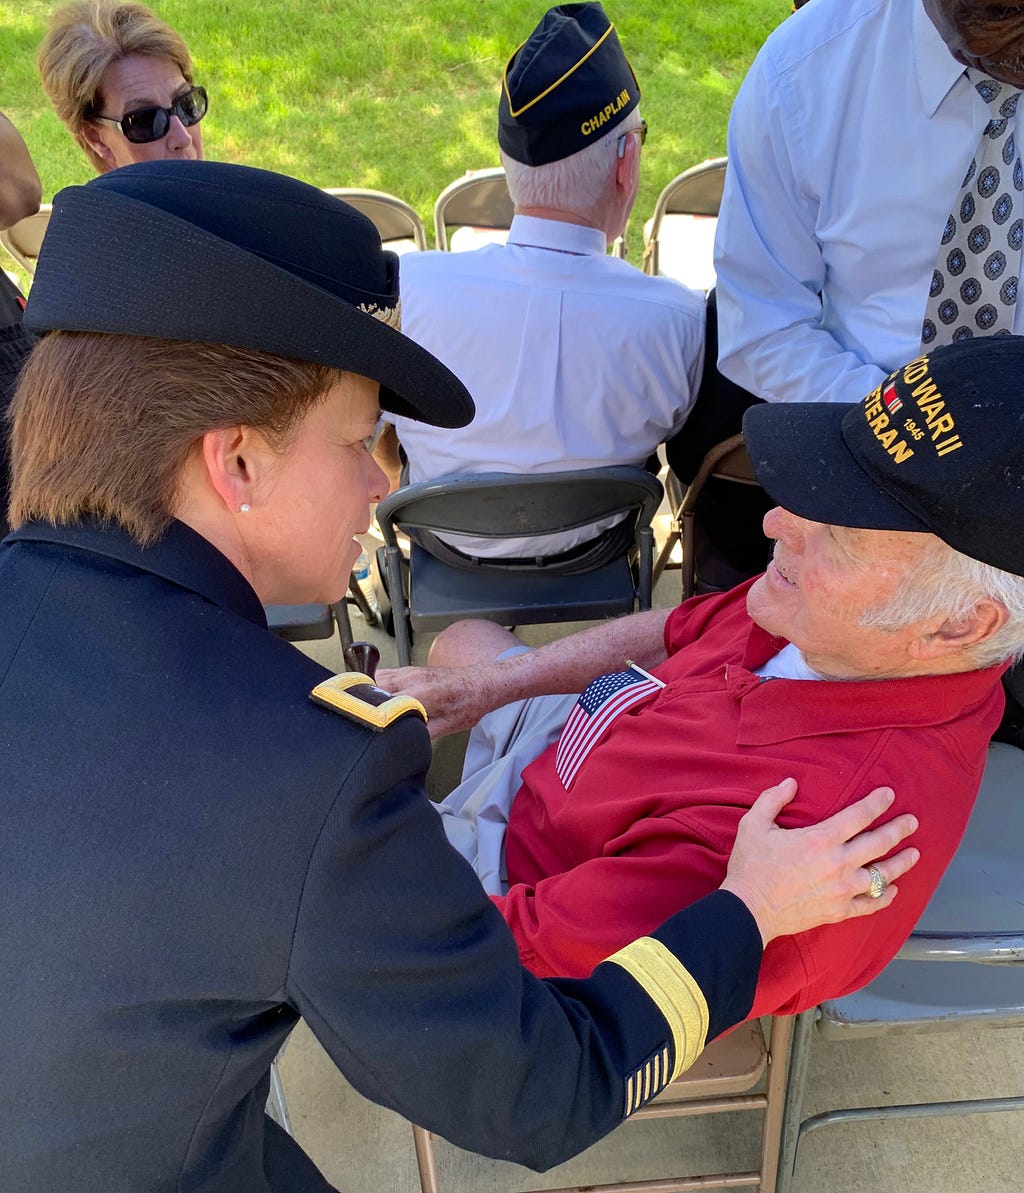 The author thanks a World War II veteran for his service